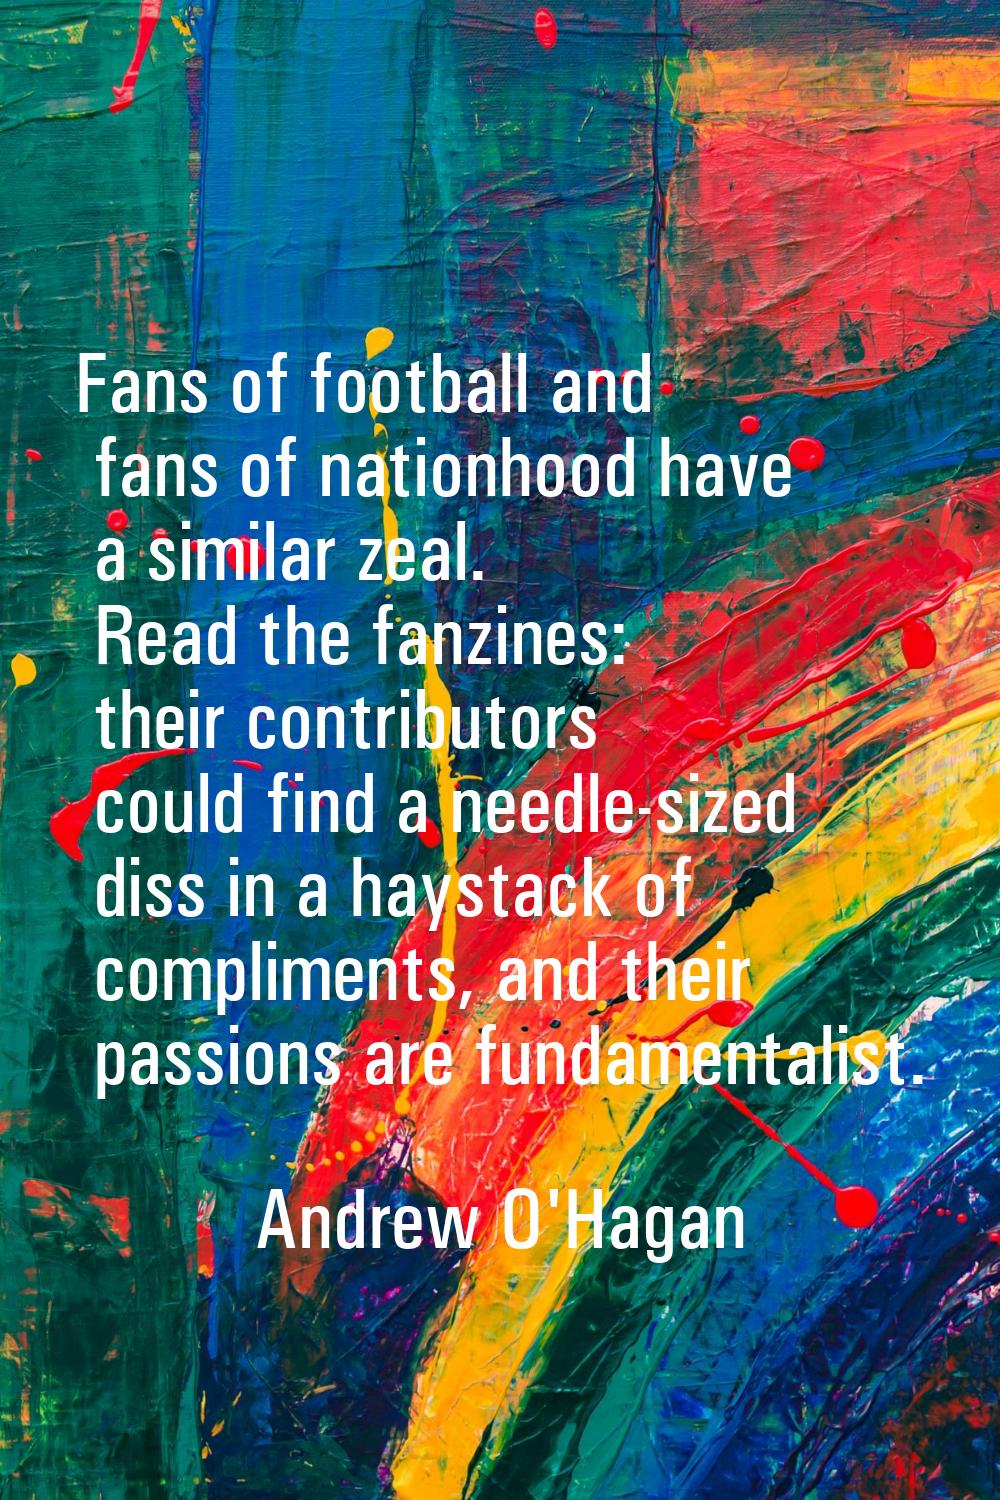 Fans of football and fans of nationhood have a similar zeal. Read the fanzines: their contributors 